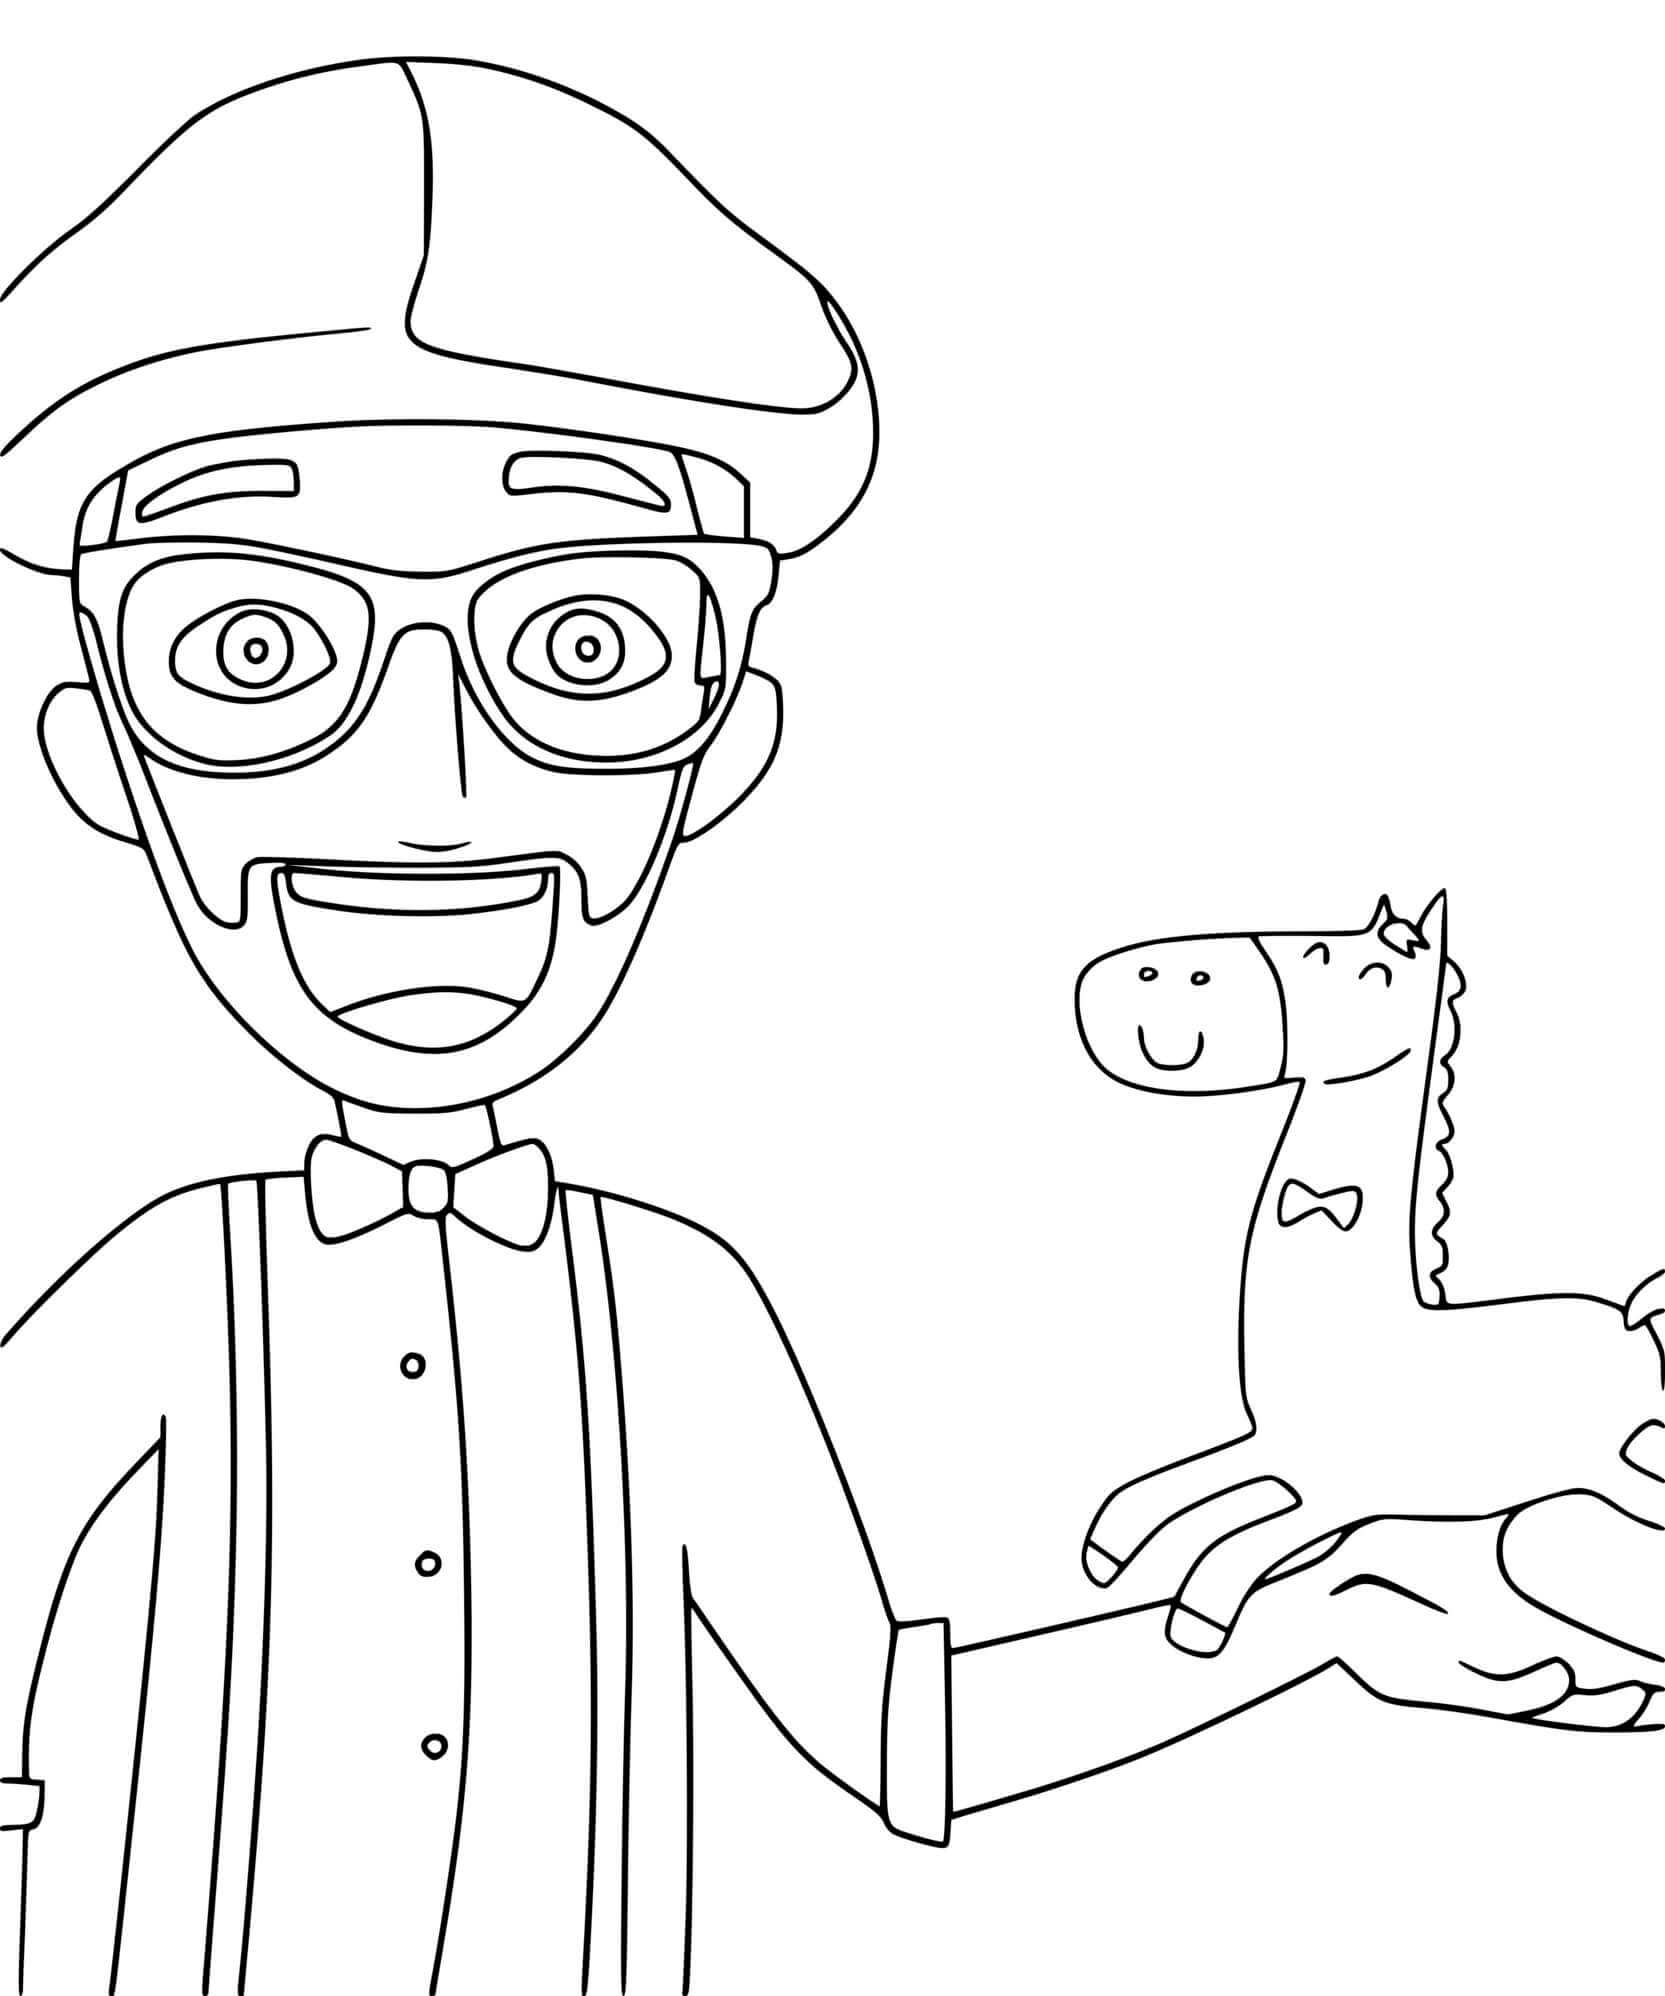 Blippi With A Horse Toy